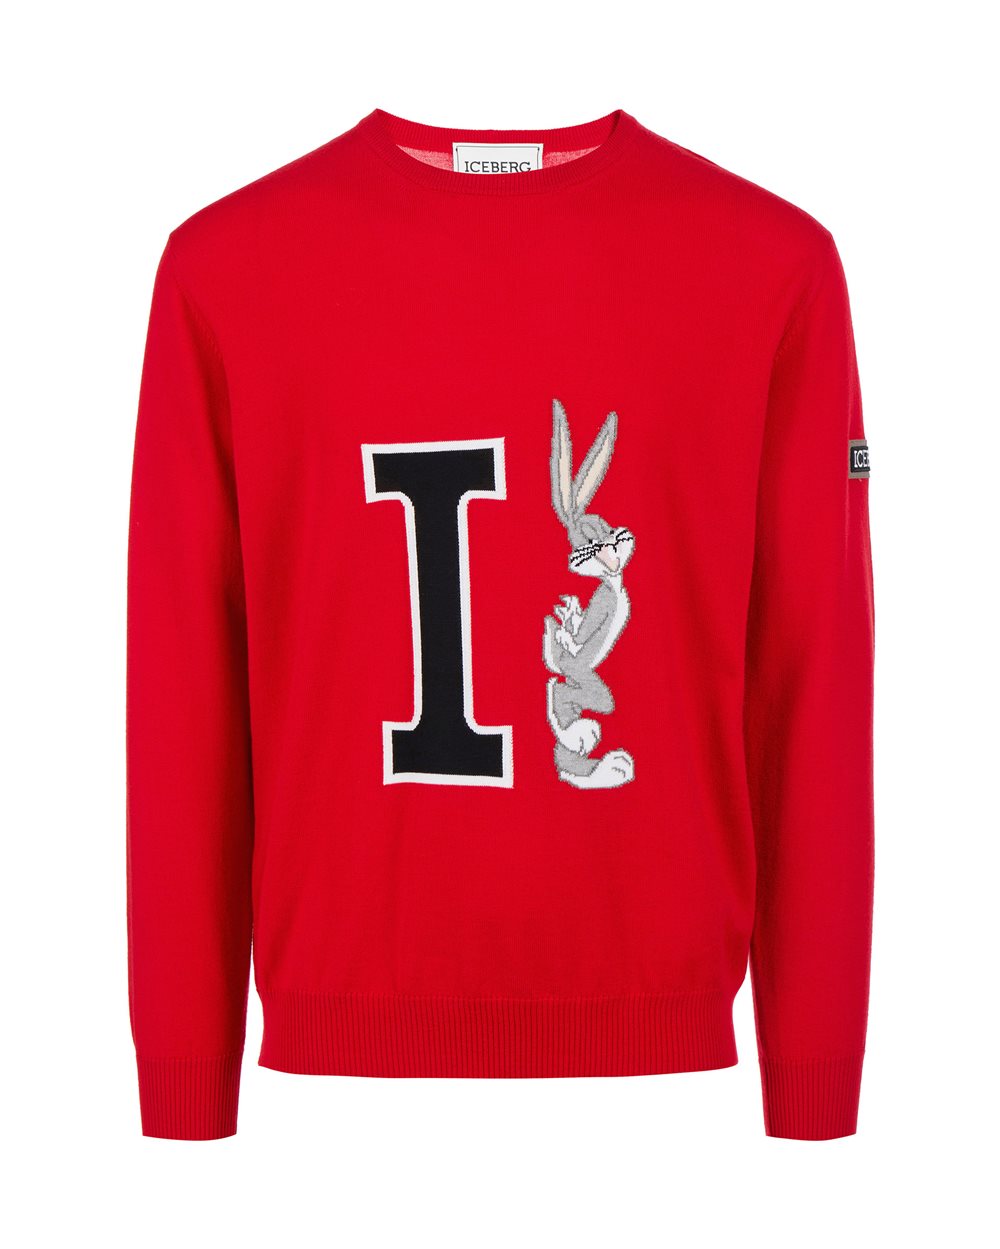 Red sweater with cartoon detail - Knitwear | Iceberg - Official Website